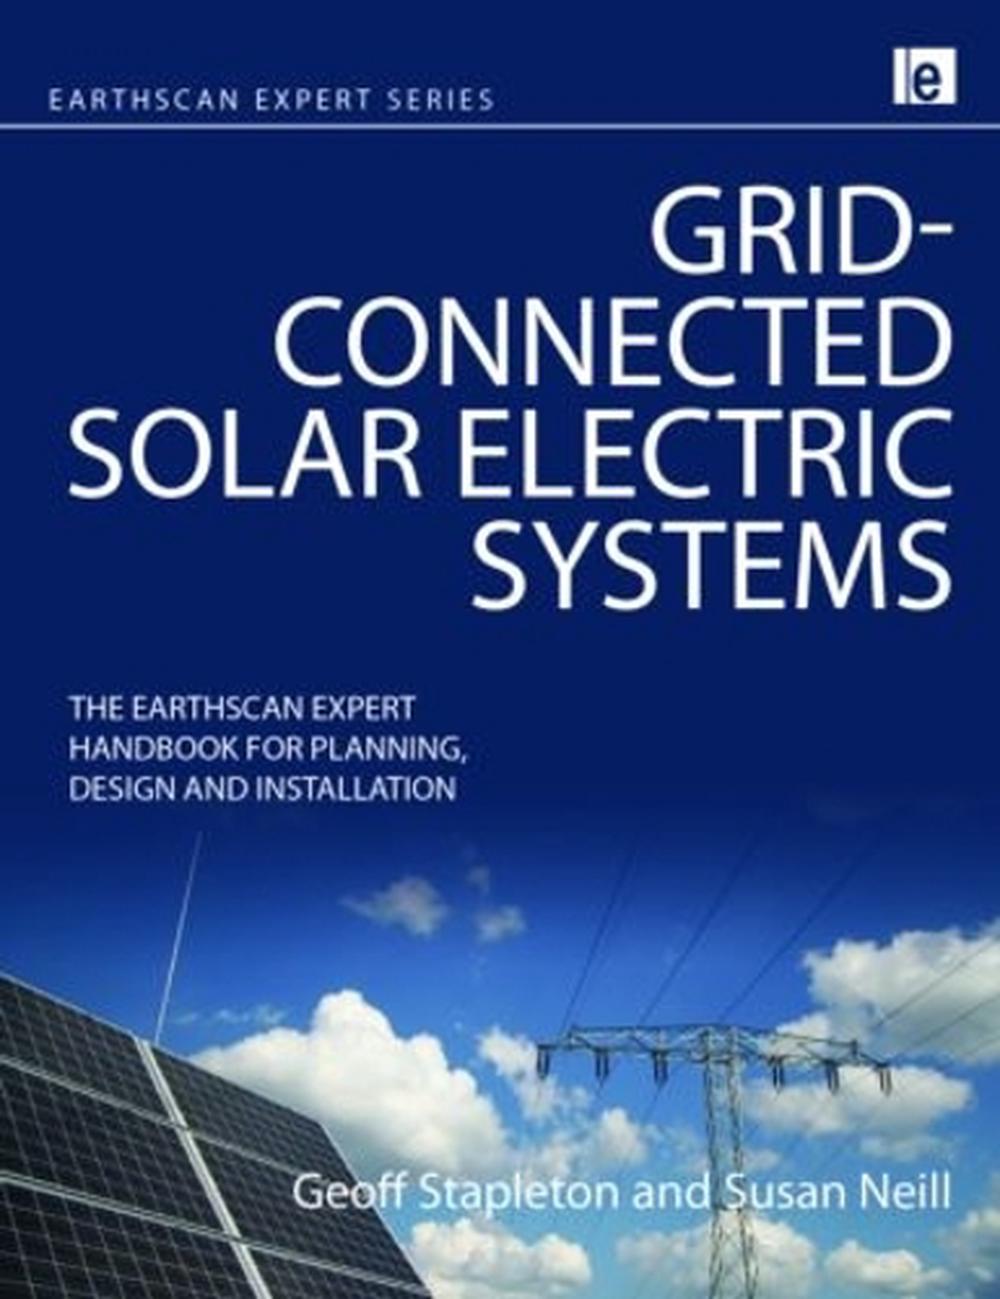 literature review of grid connected pv system